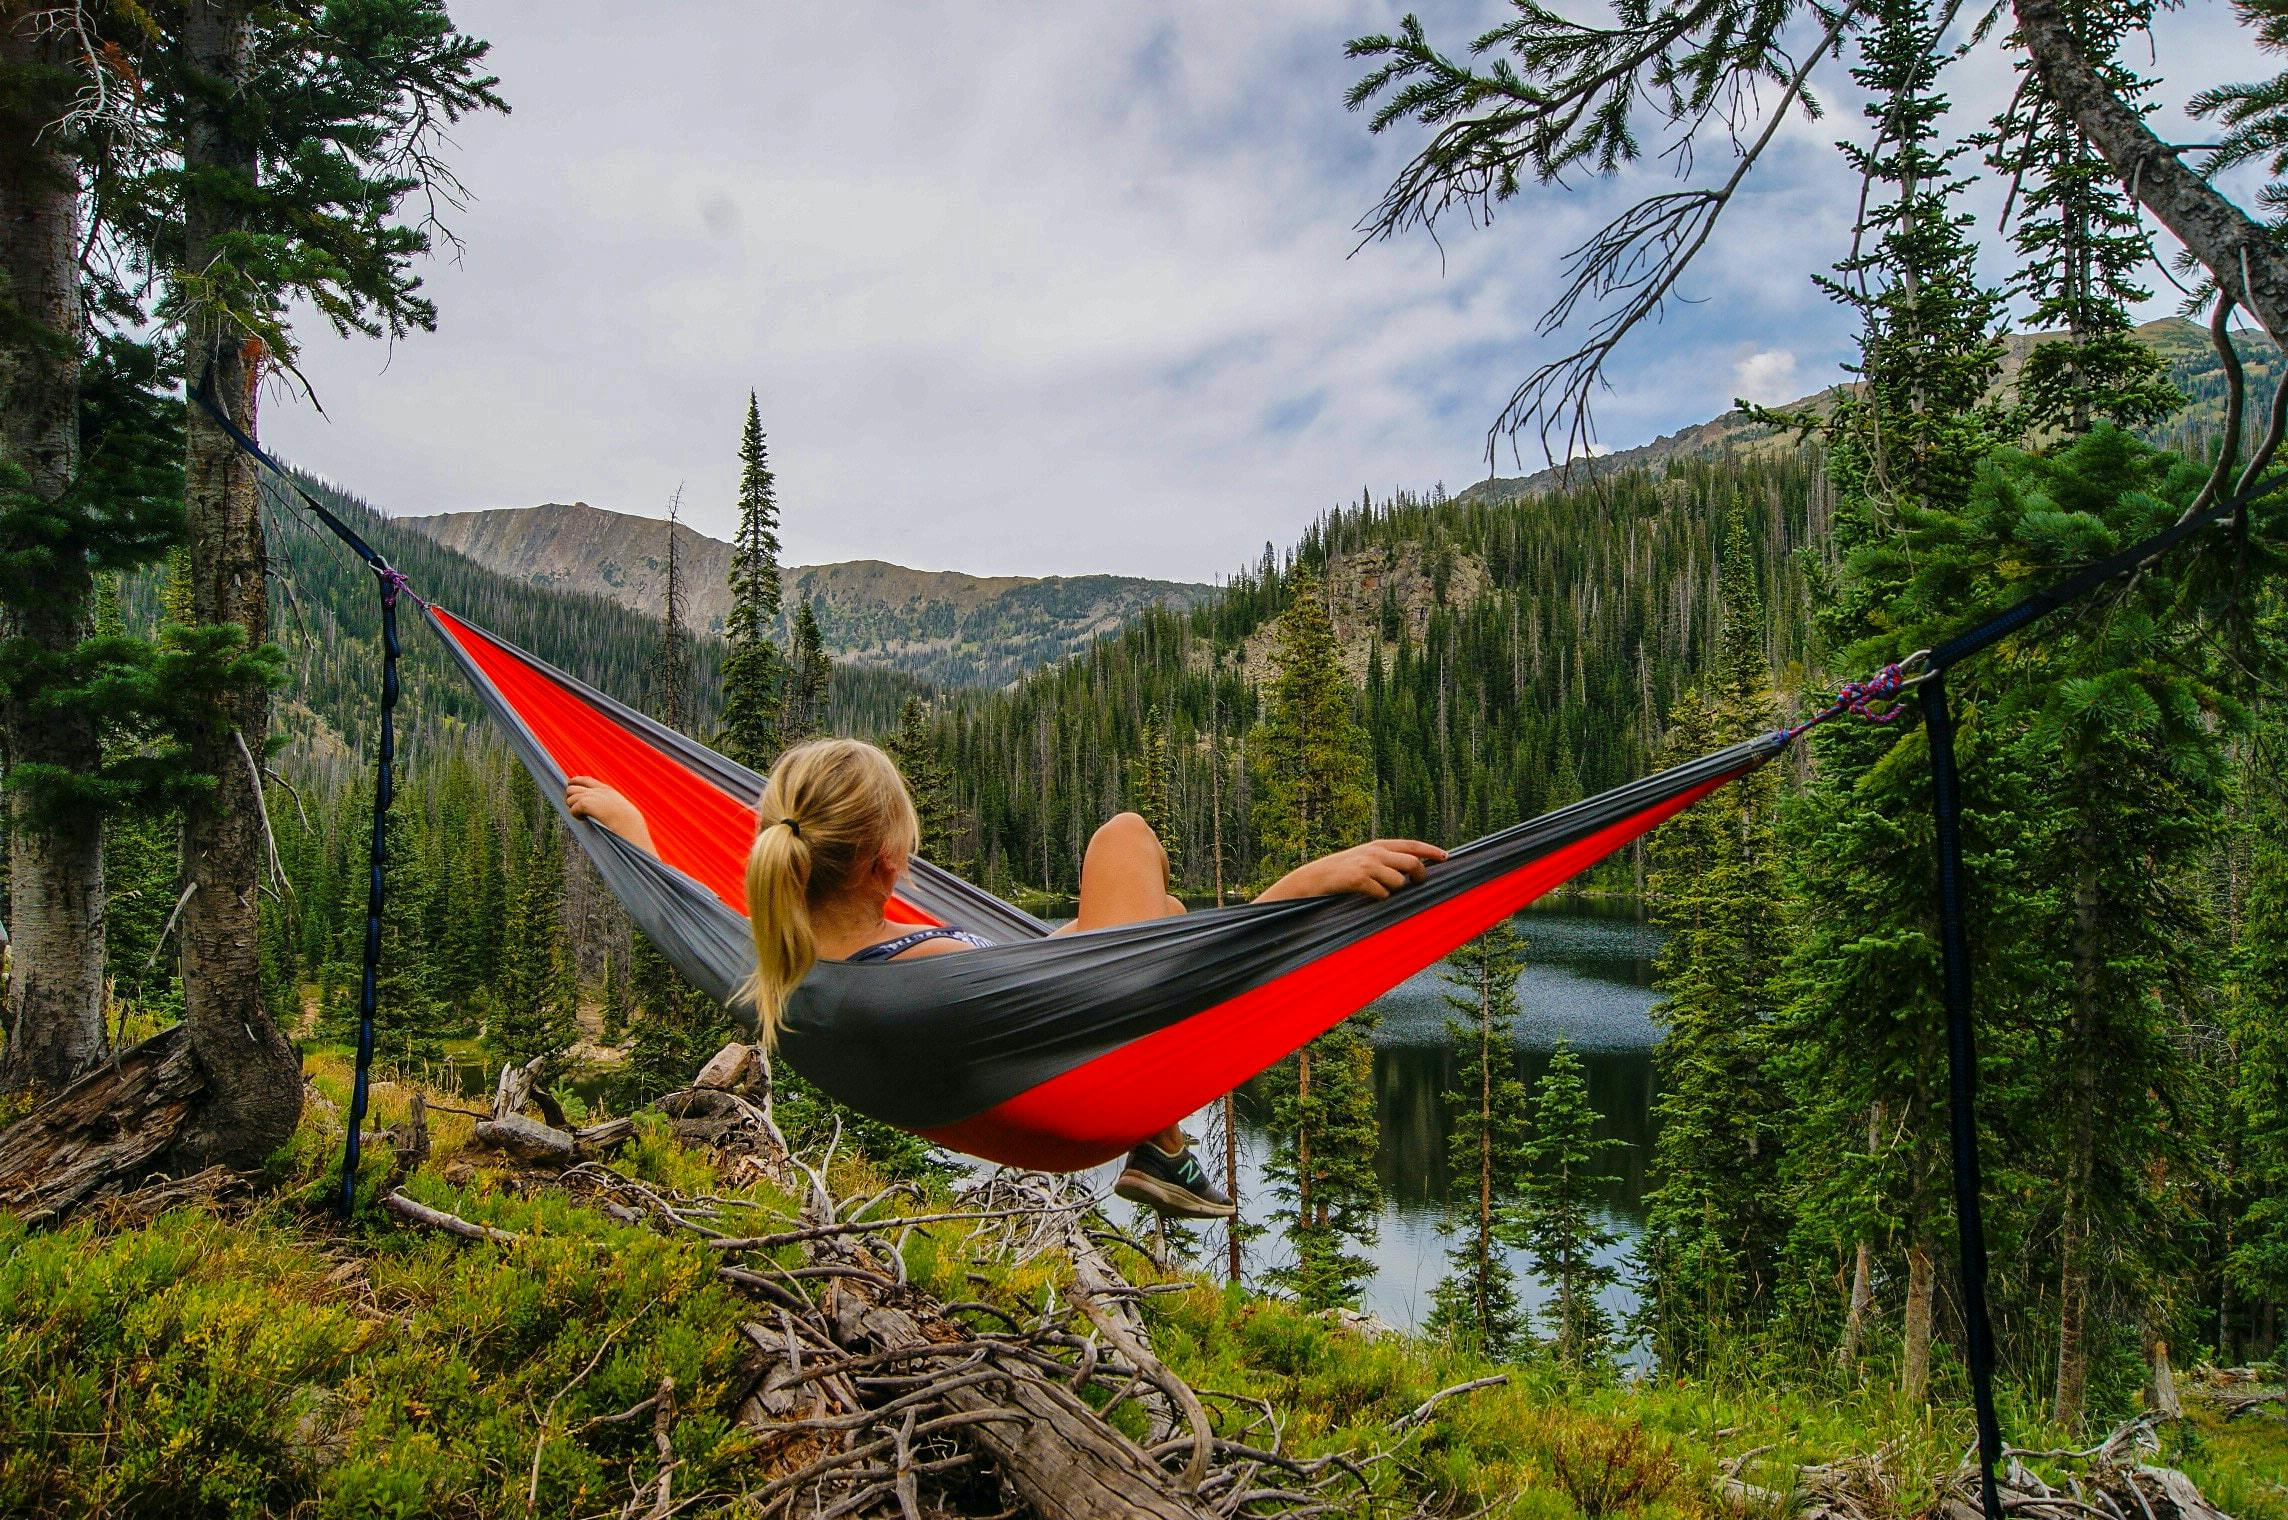 A woman leans back in a red and black hammock, looking out at trees and a lake